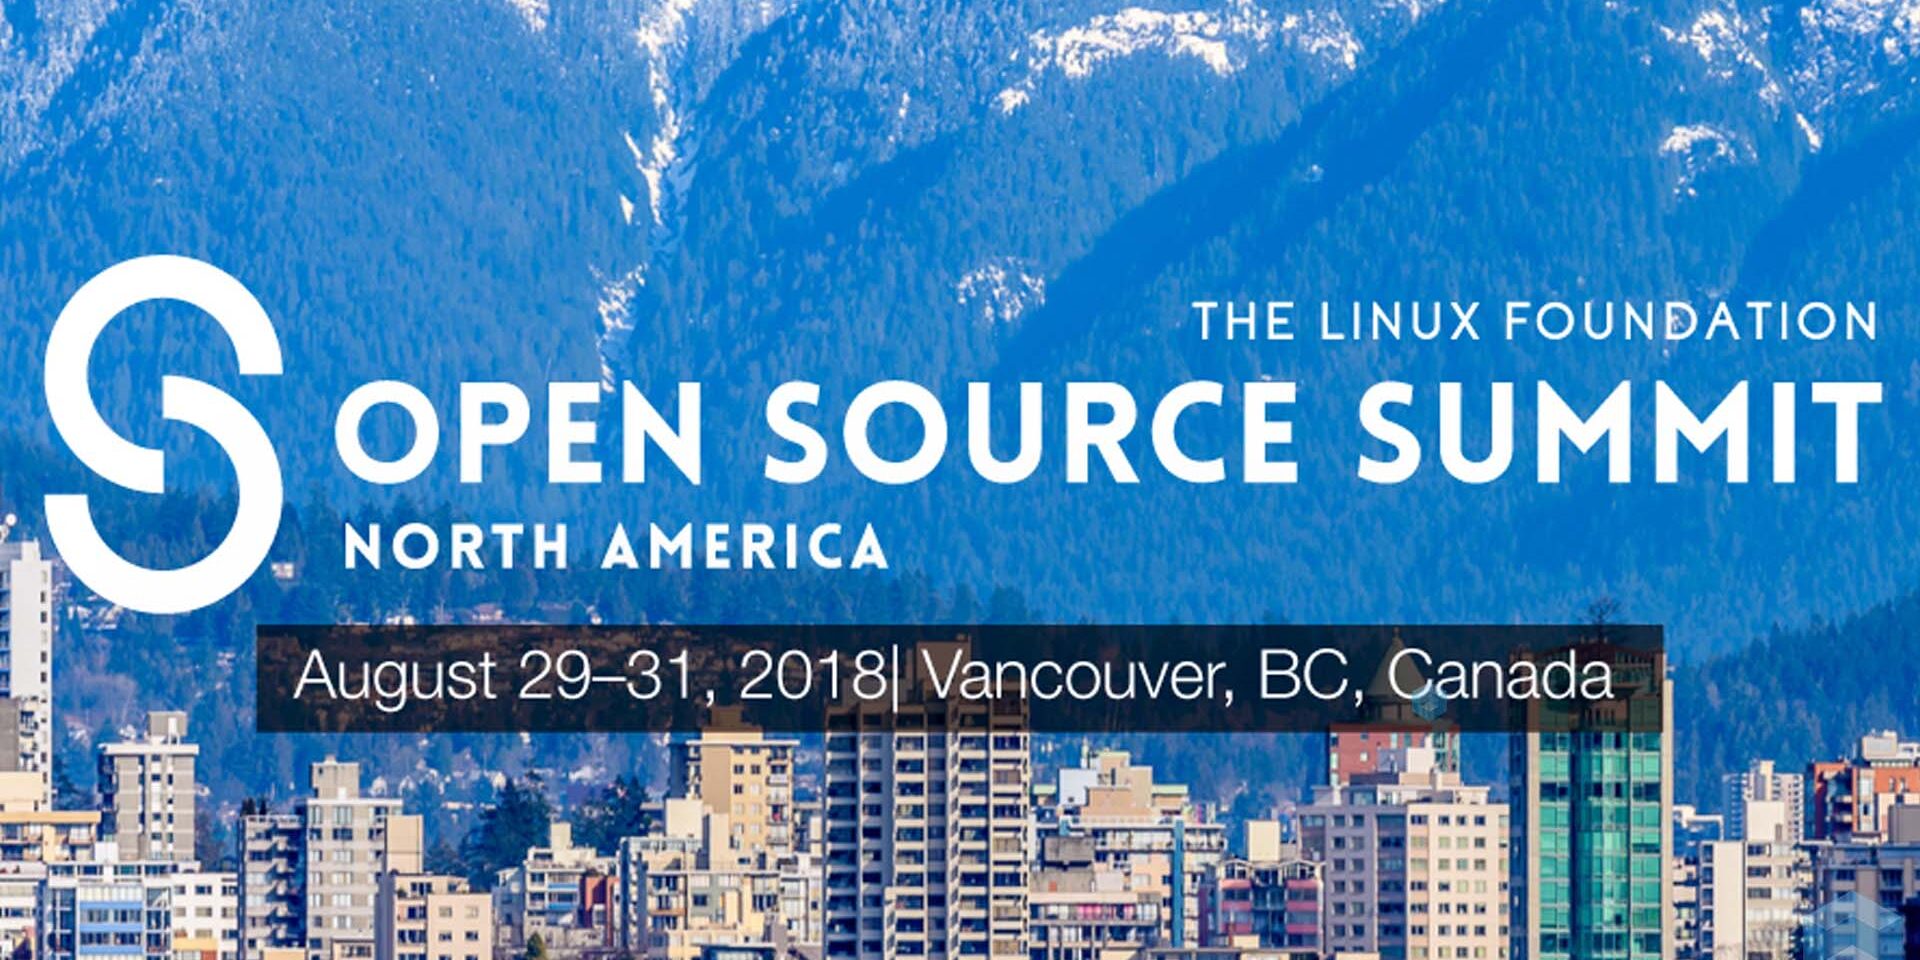 Journal notes from Open Source Summit 2018